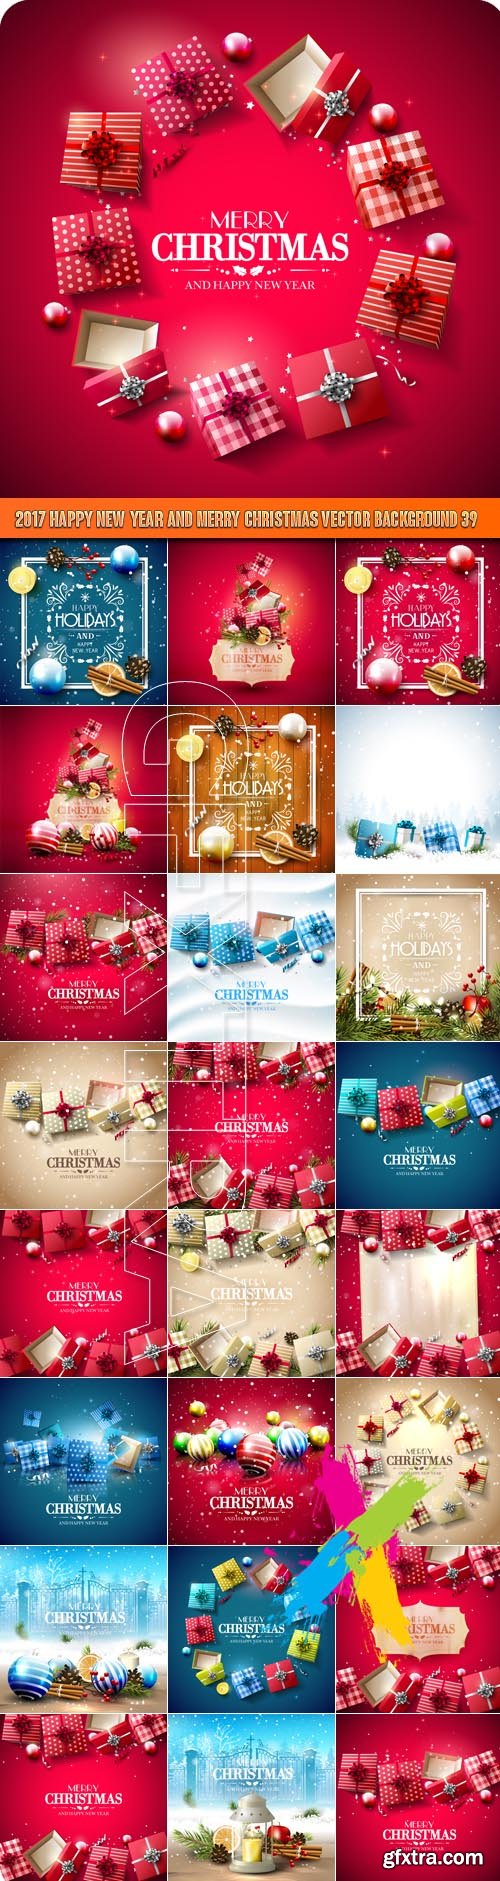 2017 Happy New Year and Merry Christmas vector background 39